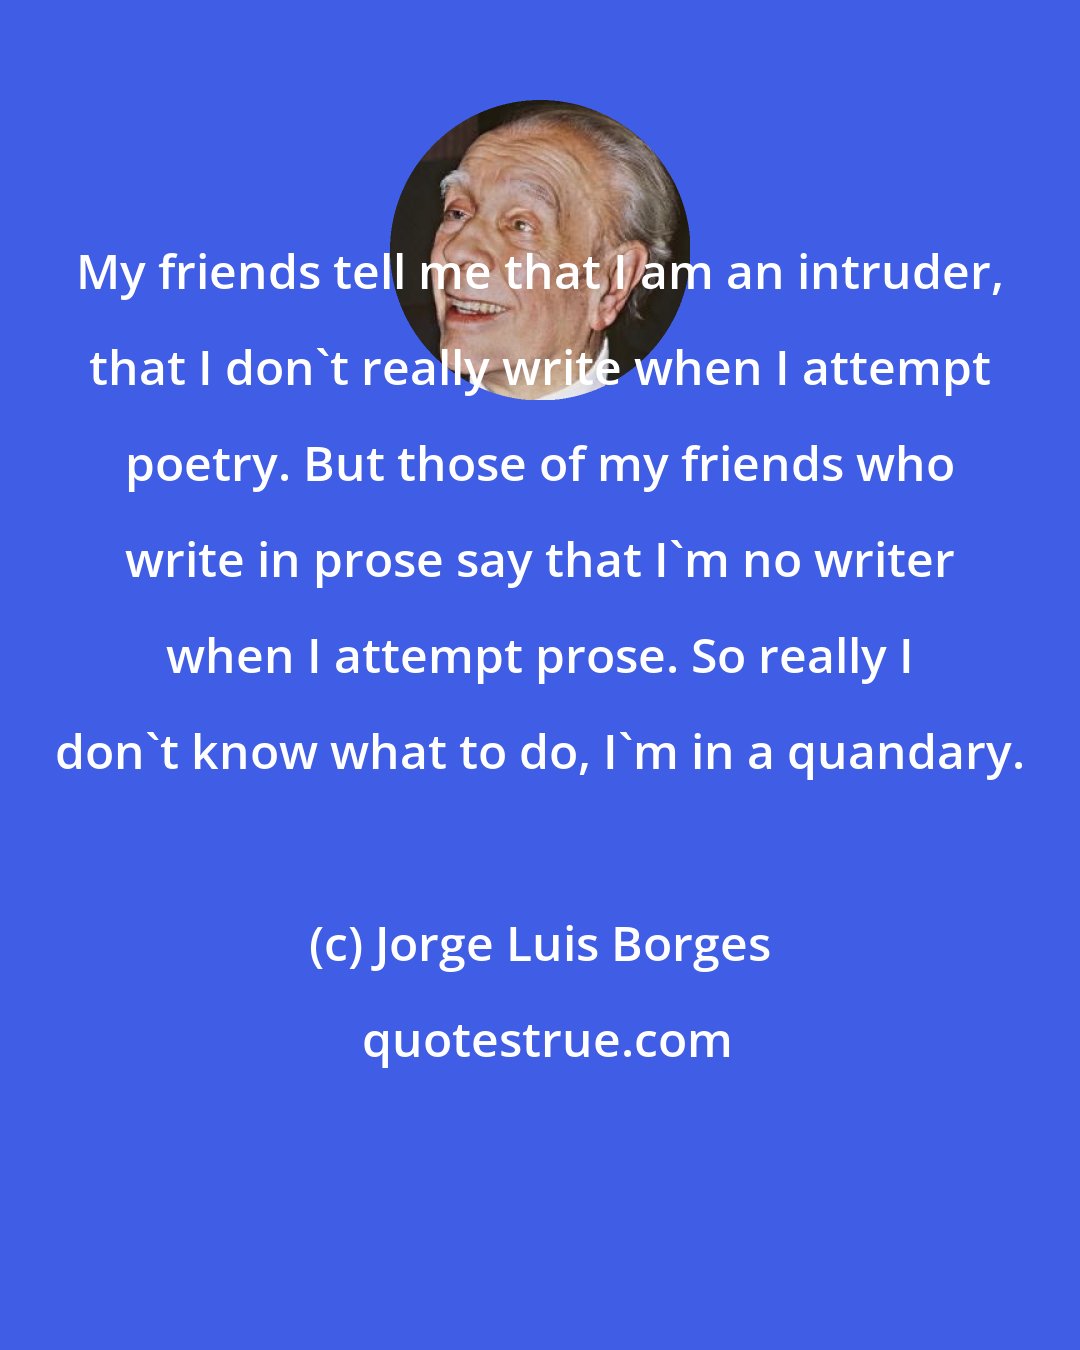 Jorge Luis Borges: My friends tell me that I am an intruder, that I don't really write when I attempt poetry. But those of my friends who write in prose say that I'm no writer when I attempt prose. So really I don't know what to do, I'm in a quandary.